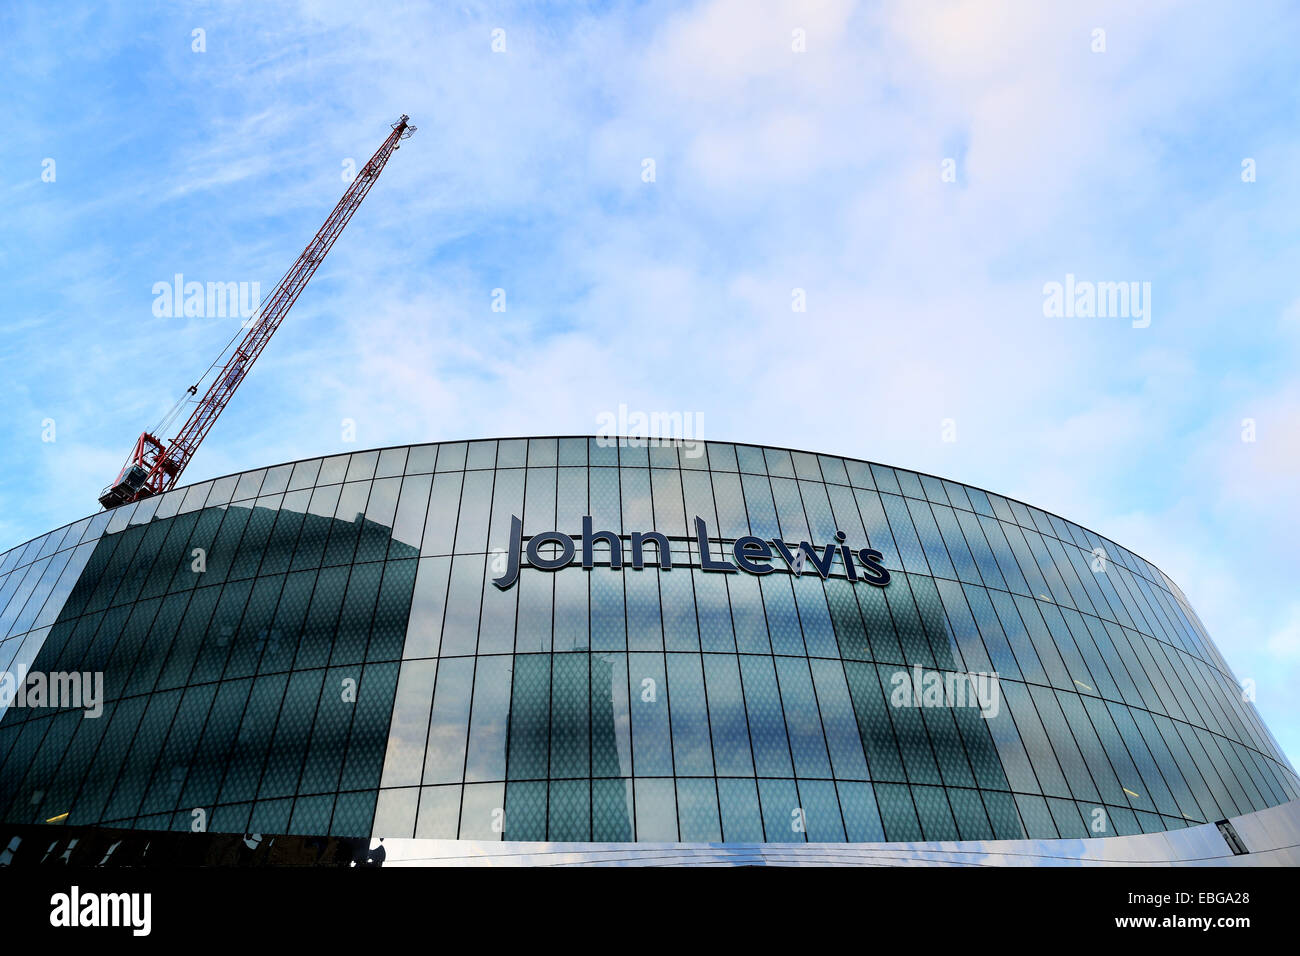 The new flagship John Lewis store in Birmingham city centre, part of the Birmingham New Street , Grand Central Stock Photo